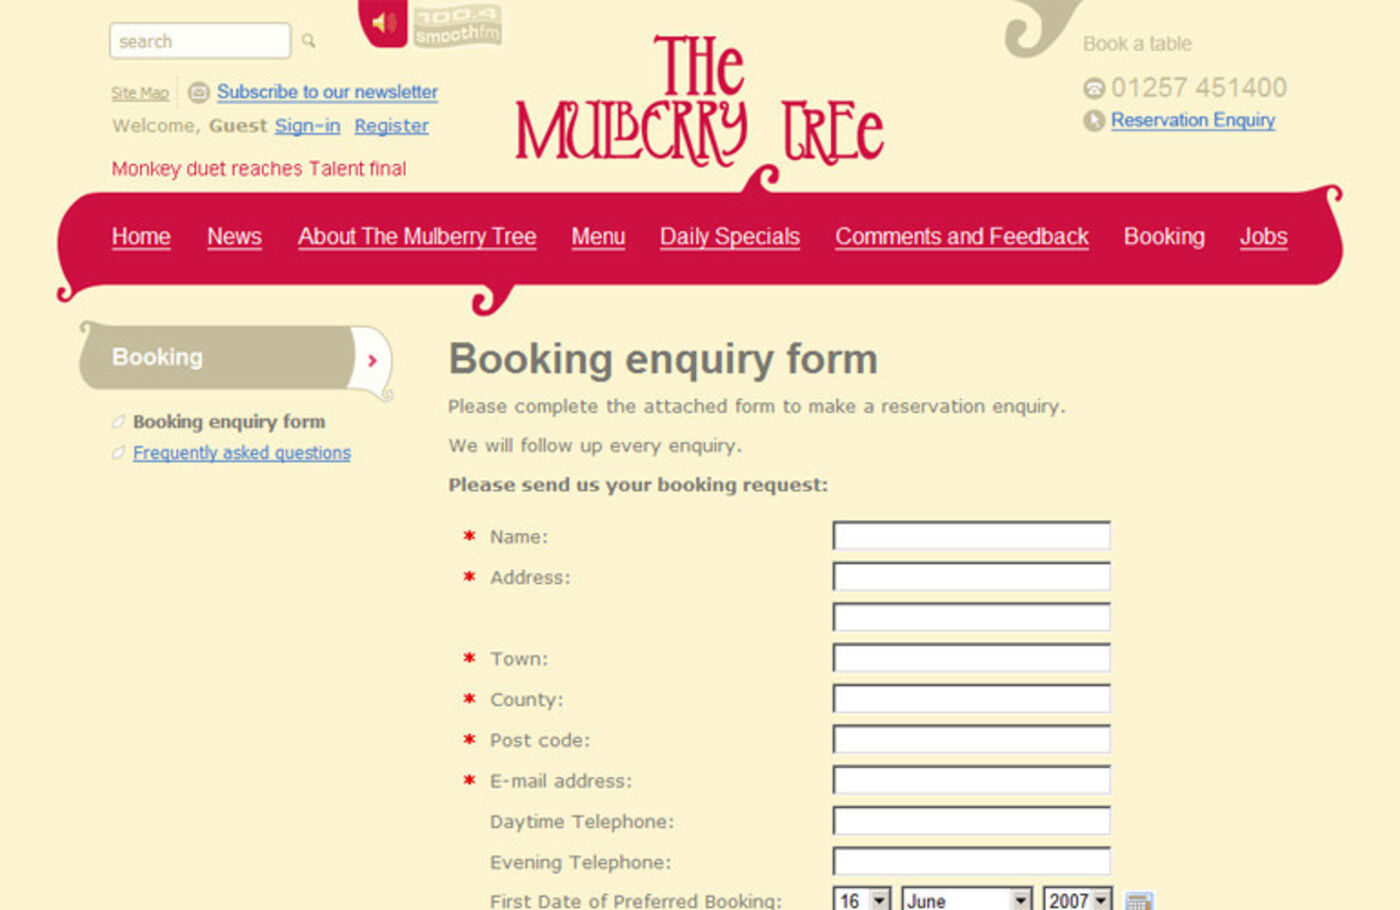 The Mulberry Tree Booking enquiry form